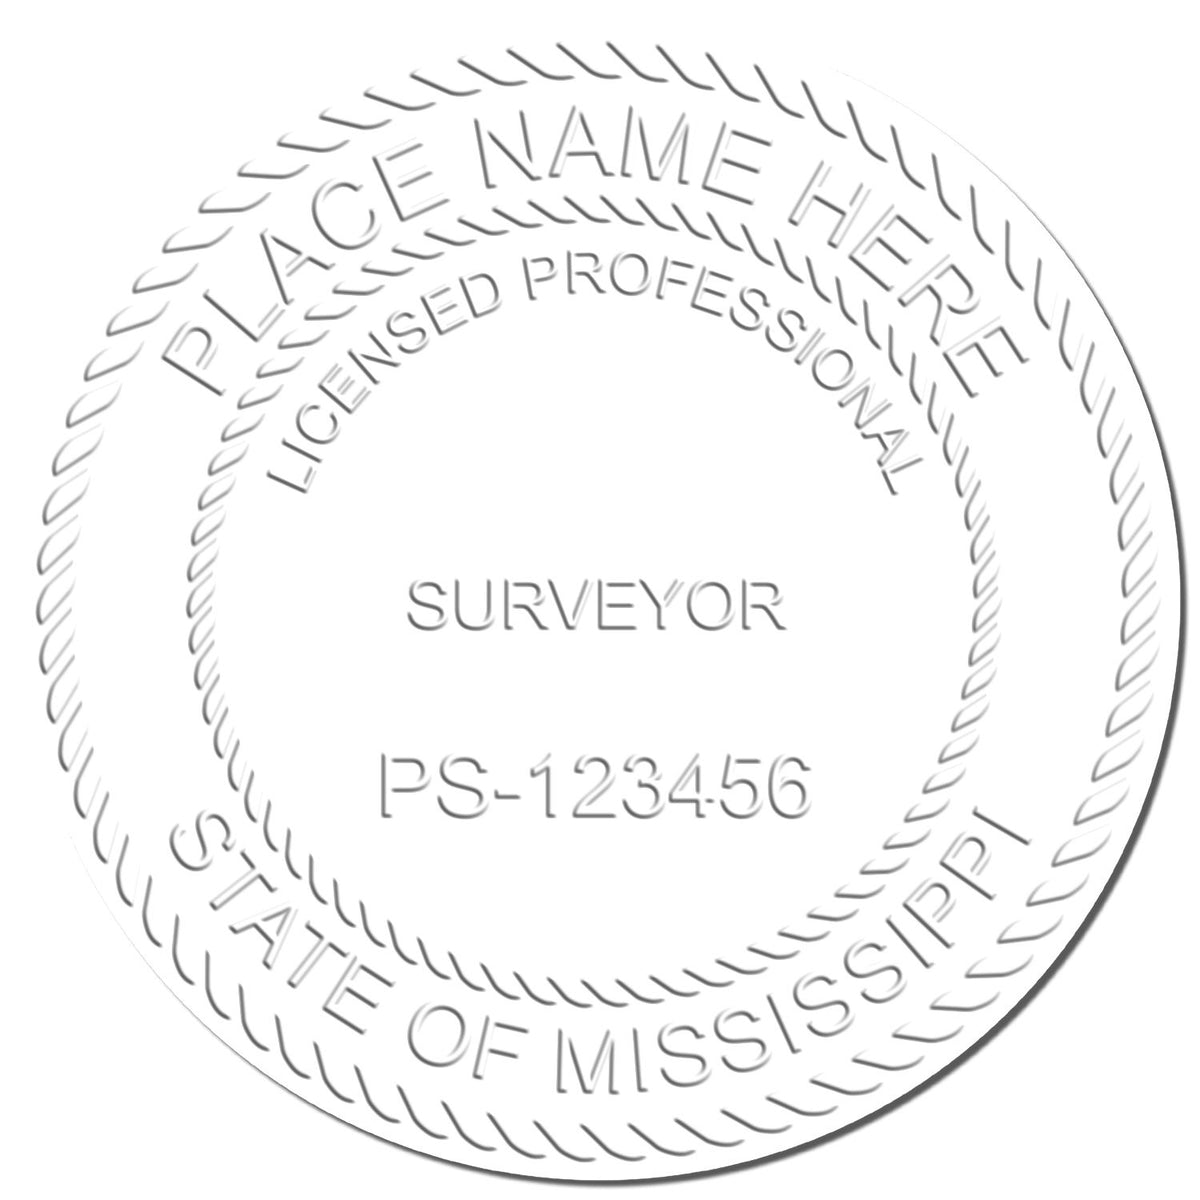 This paper is stamped with a sample imprint of the State of Mississippi Soft Land Surveyor Embossing Seal, signifying its quality and reliability.